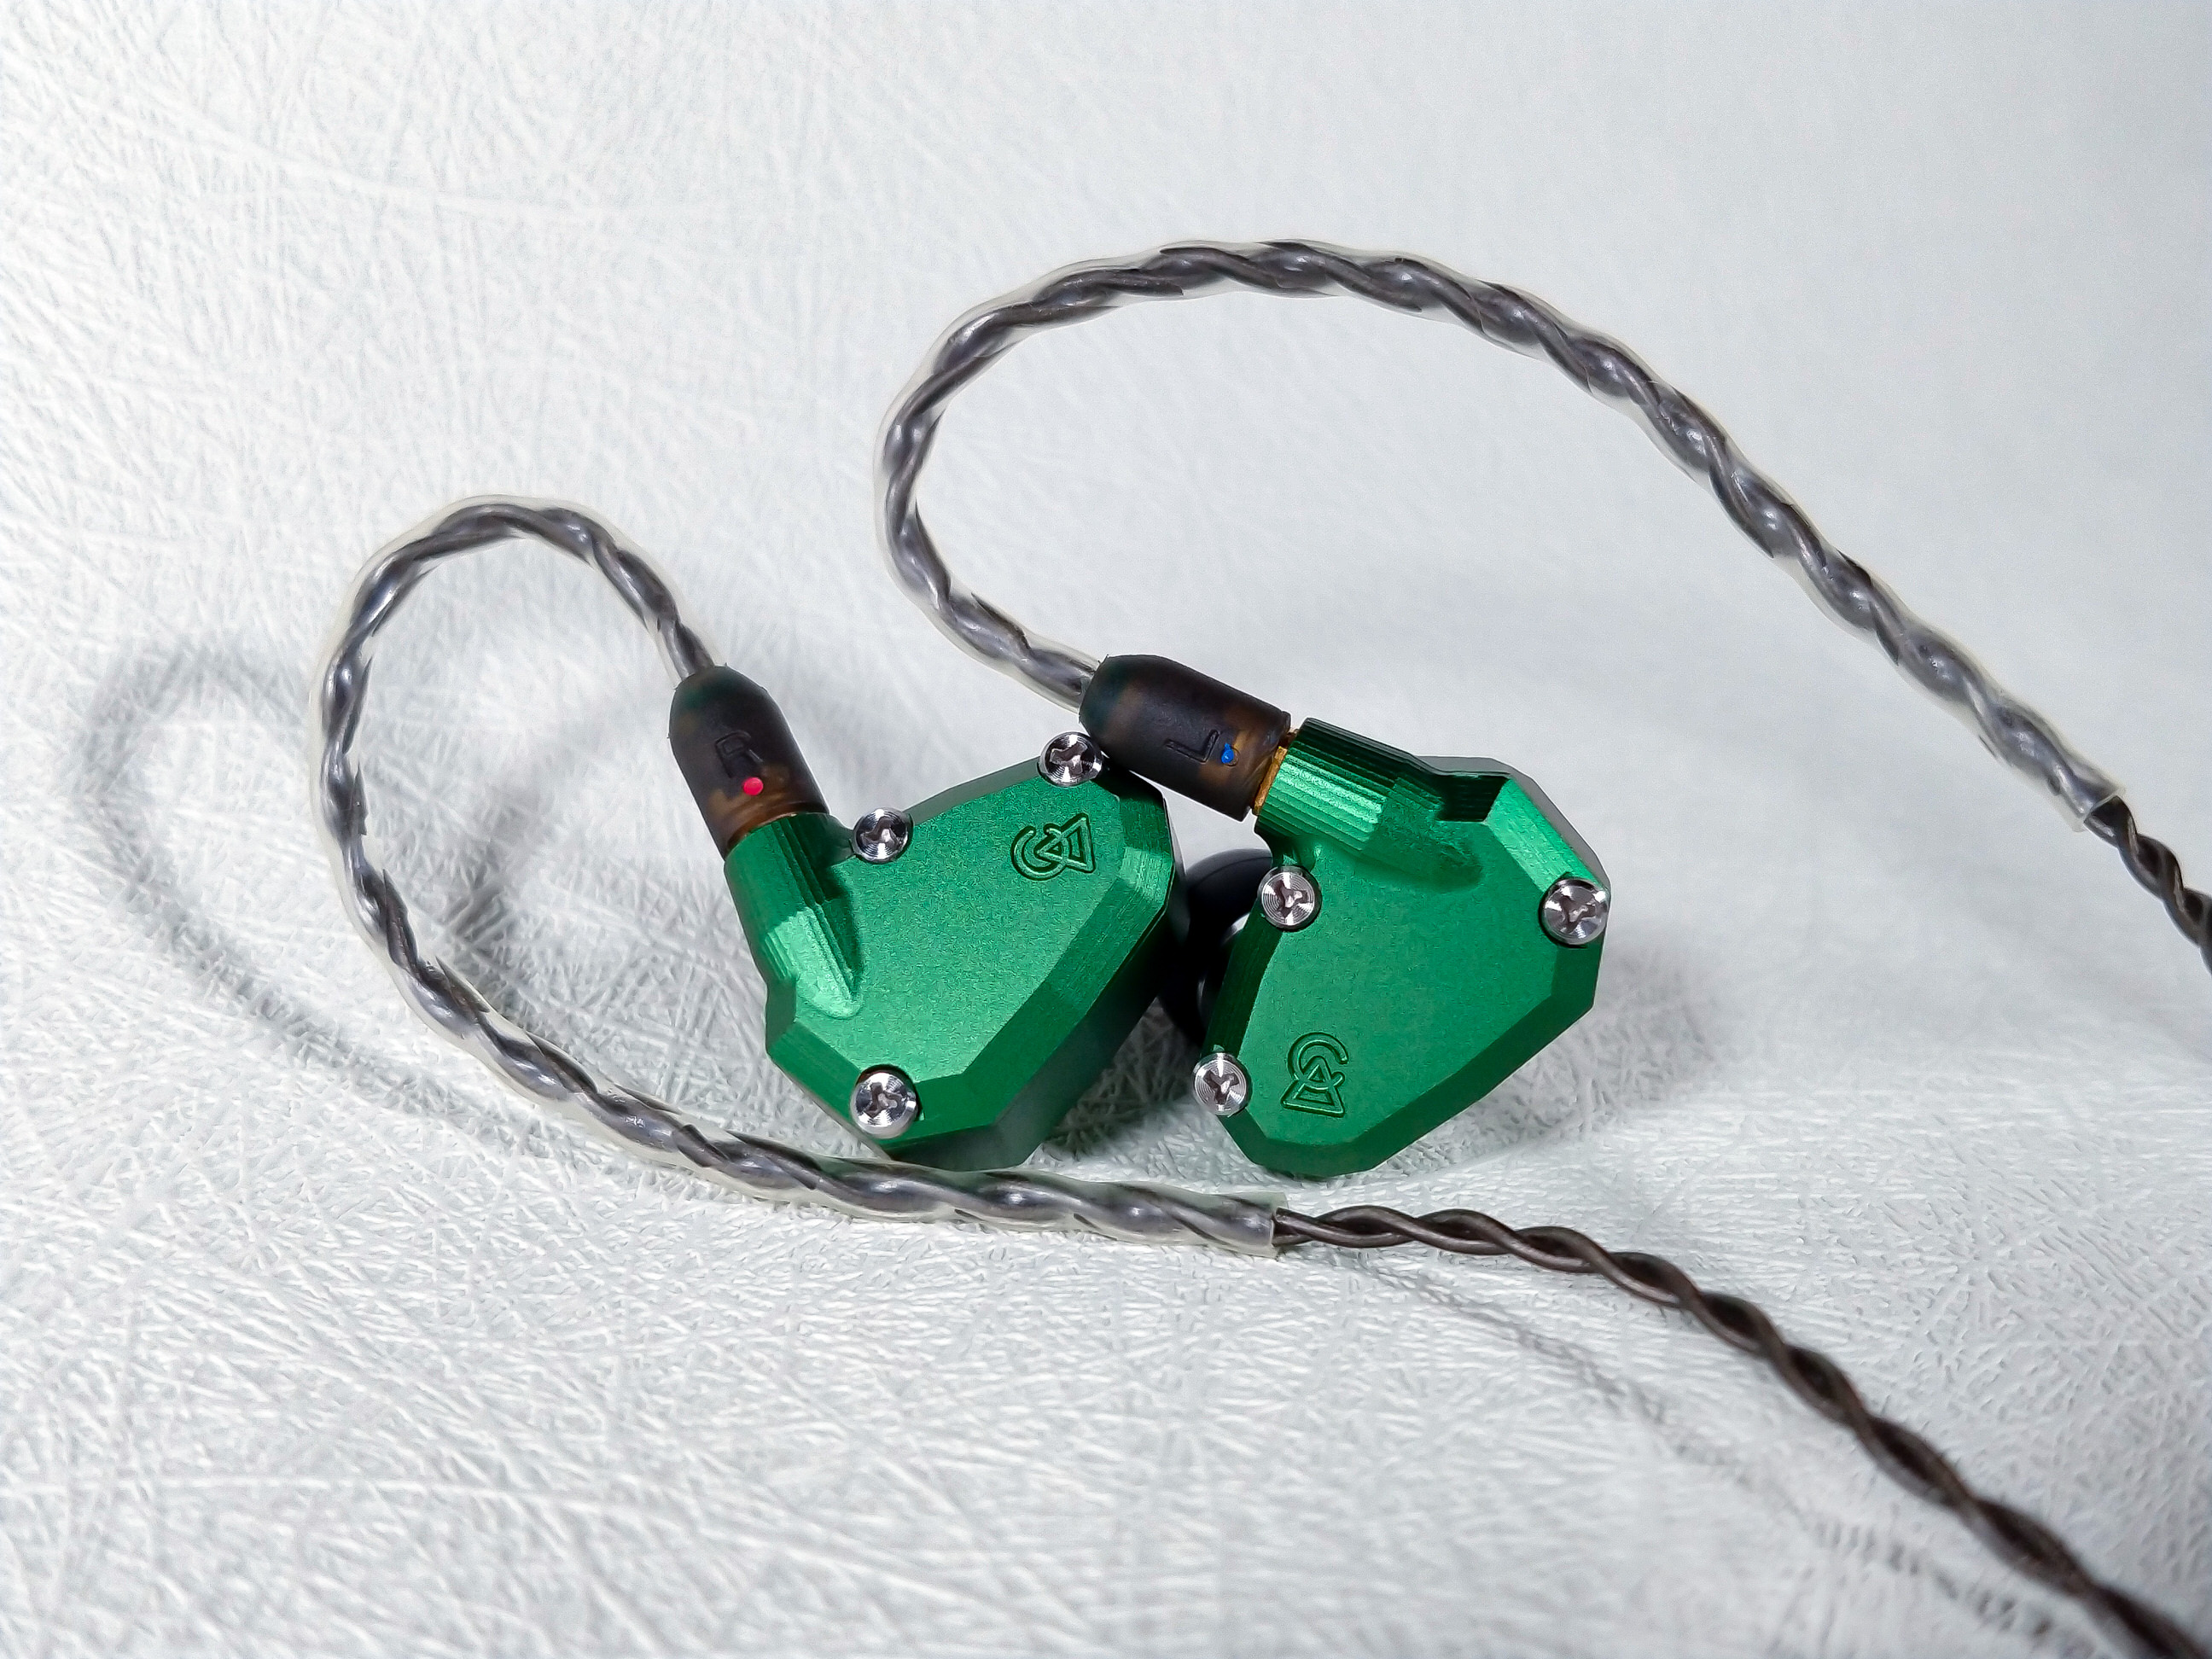 CAMPFIRE AUDIO ANDROMEDA REVIEW – IEMs and Music